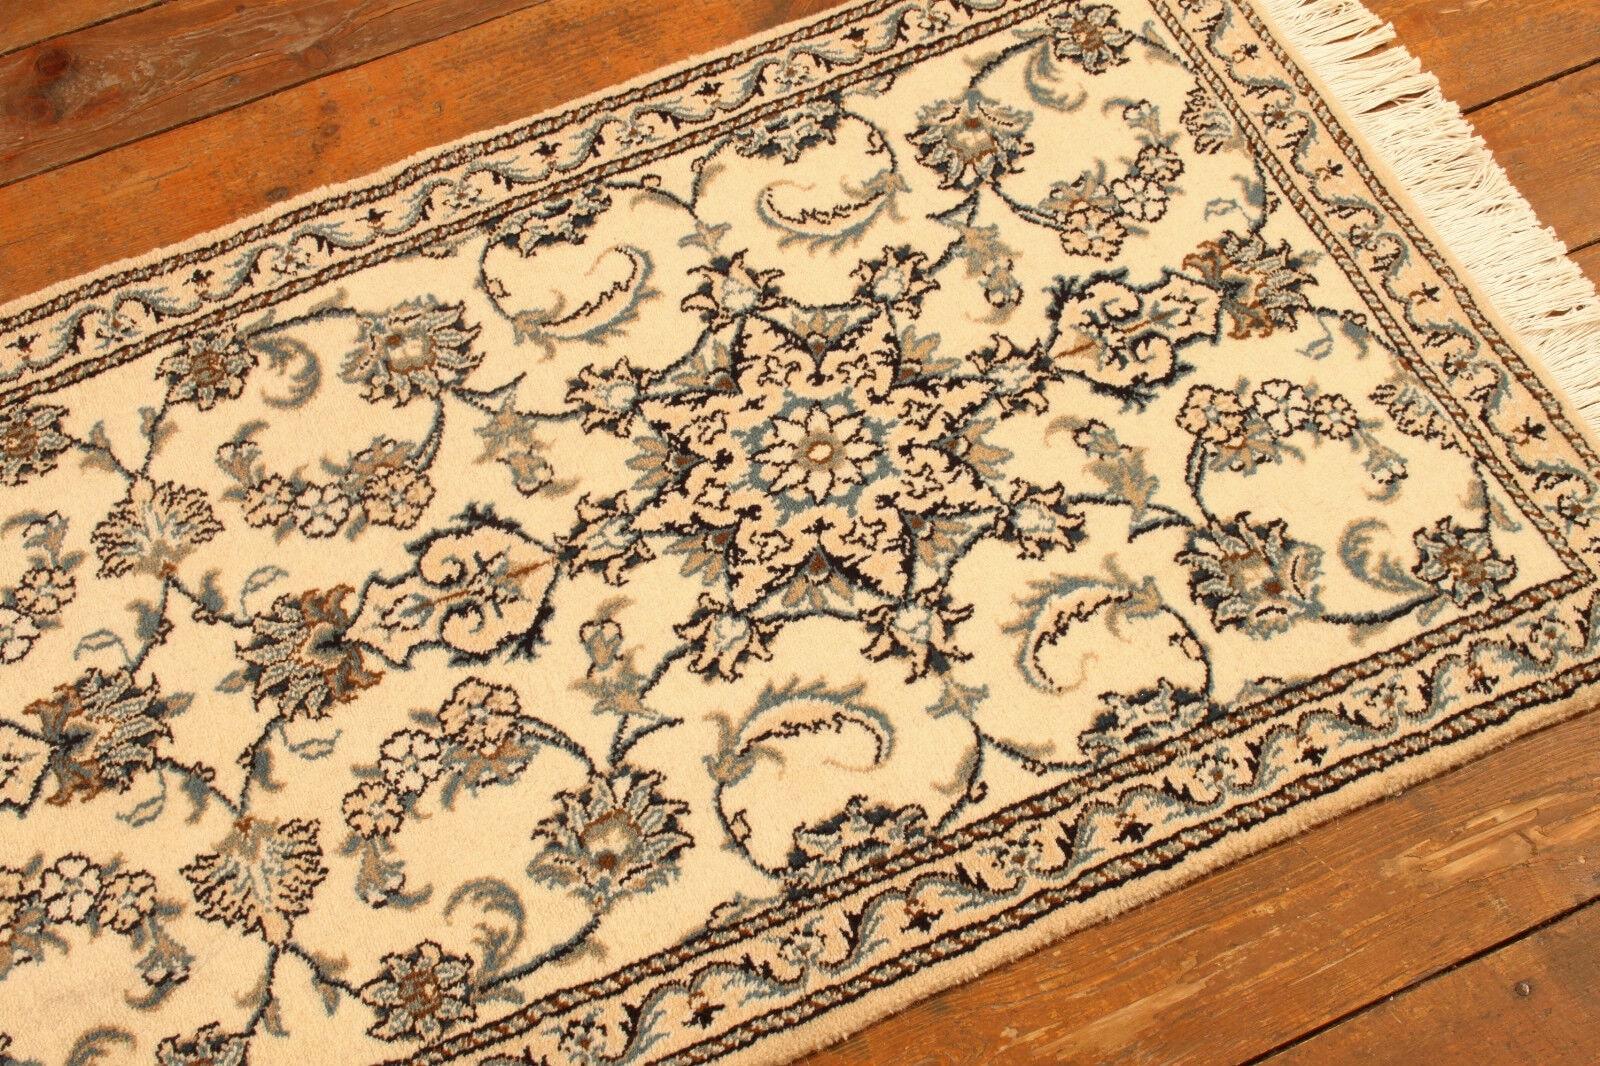 Handmade Vintage Persian Style Nain Runner Rug 2.5' x 6.3', 1980s - 1T50 In Good Condition For Sale In Bordeaux, FR